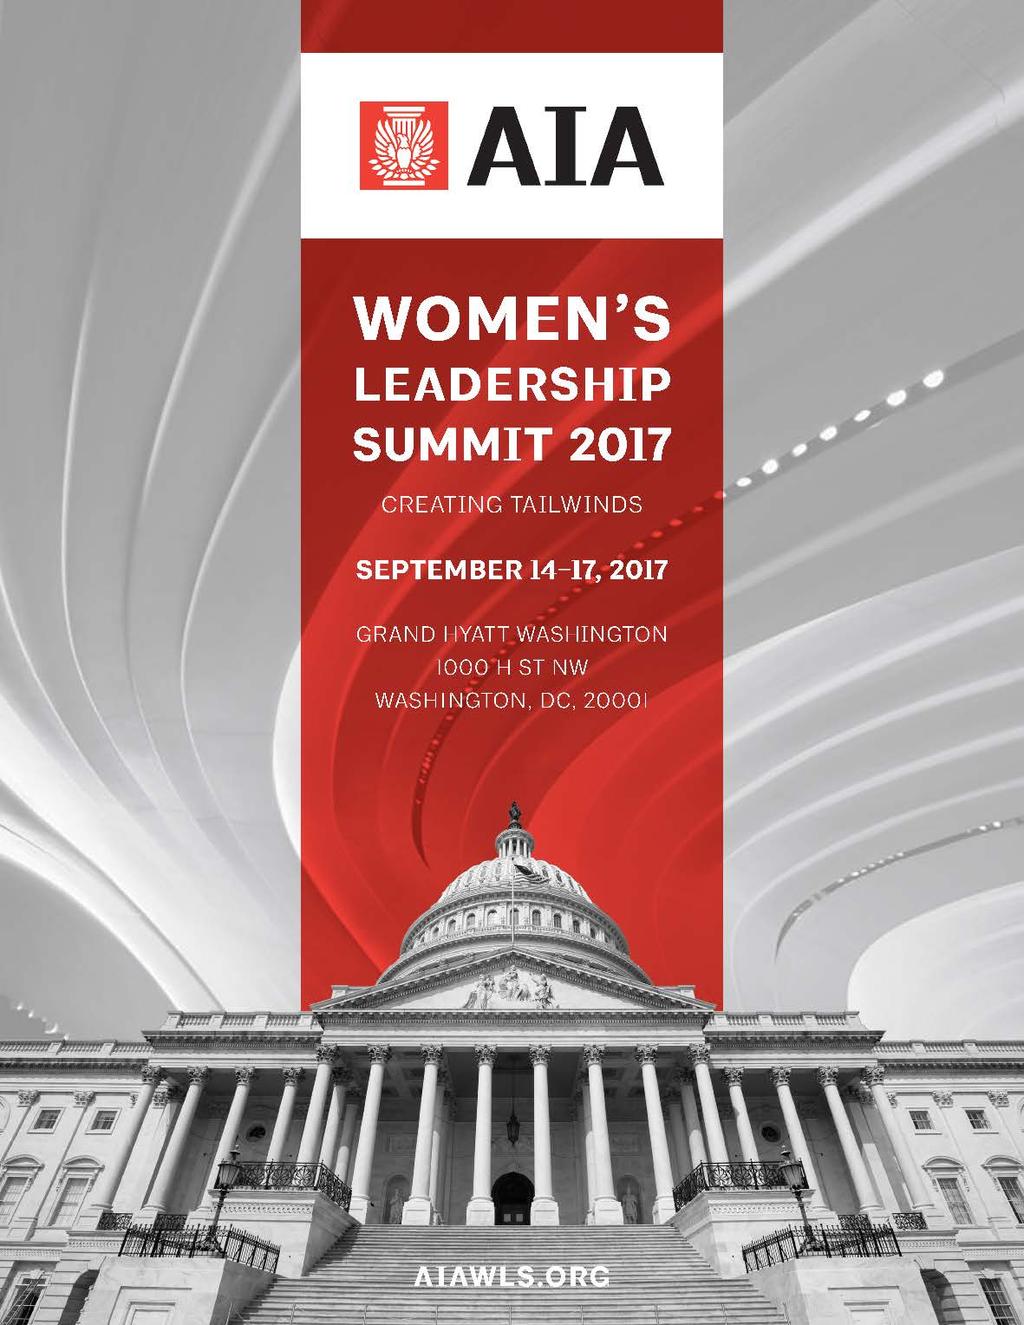 Women s Leadership Summit Creating Tailwinds The 2017 Women s Leadership Summit is a 2-day conference for women in positions of leadership.